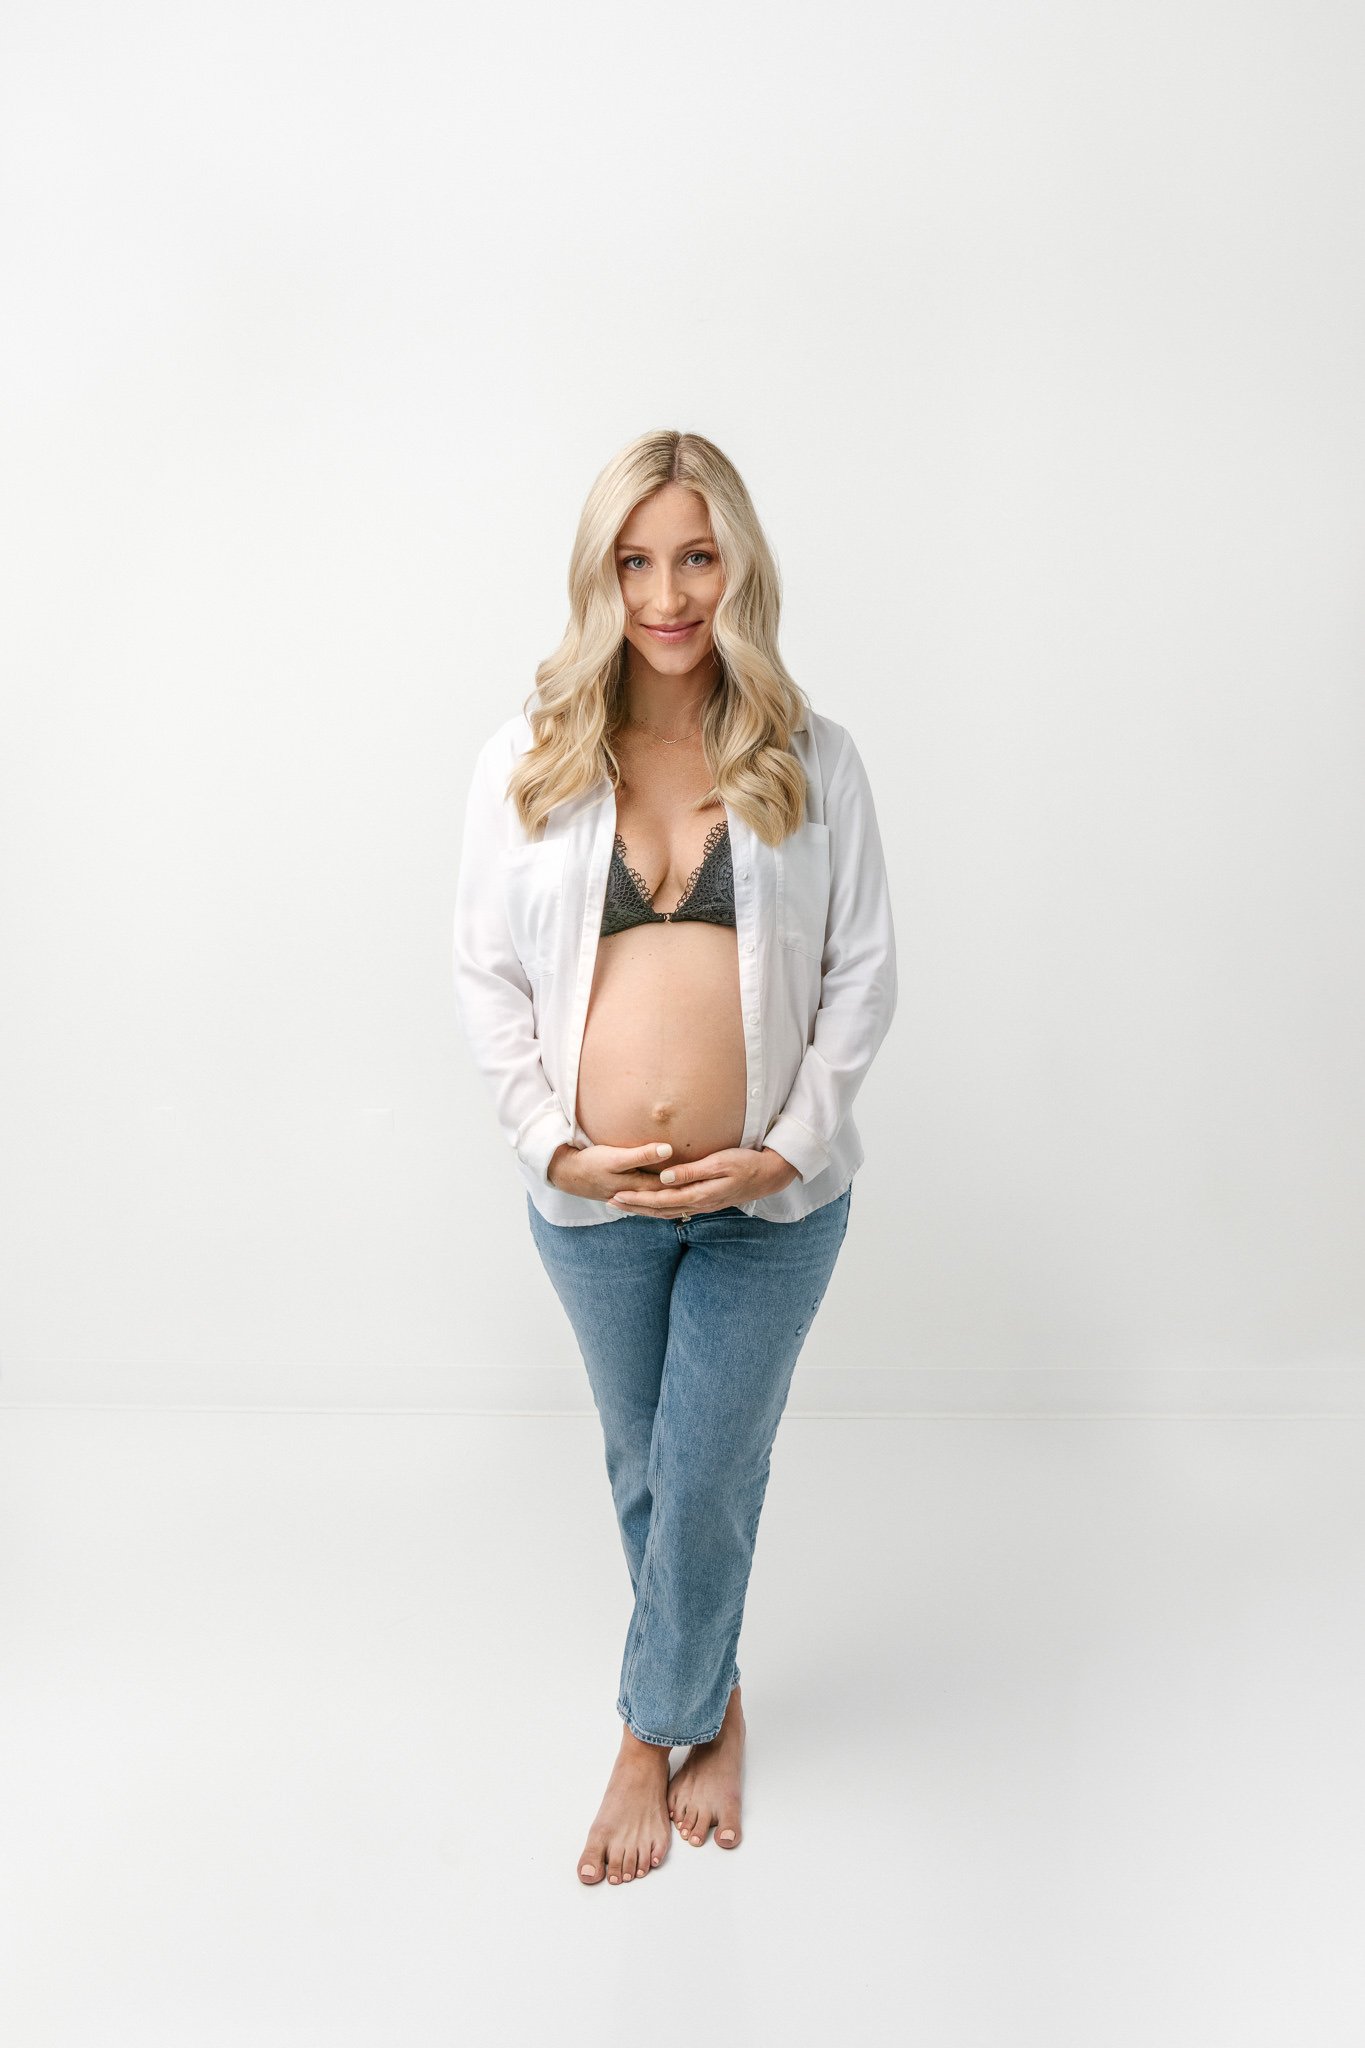  Nicole Hawkins Photography captures a maternity portrait of a woman wearing jeans and a bra with her baby bump. semi-exposed maternity #NicoleHawkinsPhotography #NicoleHawkinsMaternity #Studiomaternityportraits #NewJerseymaternity #NewYorkMaternity 